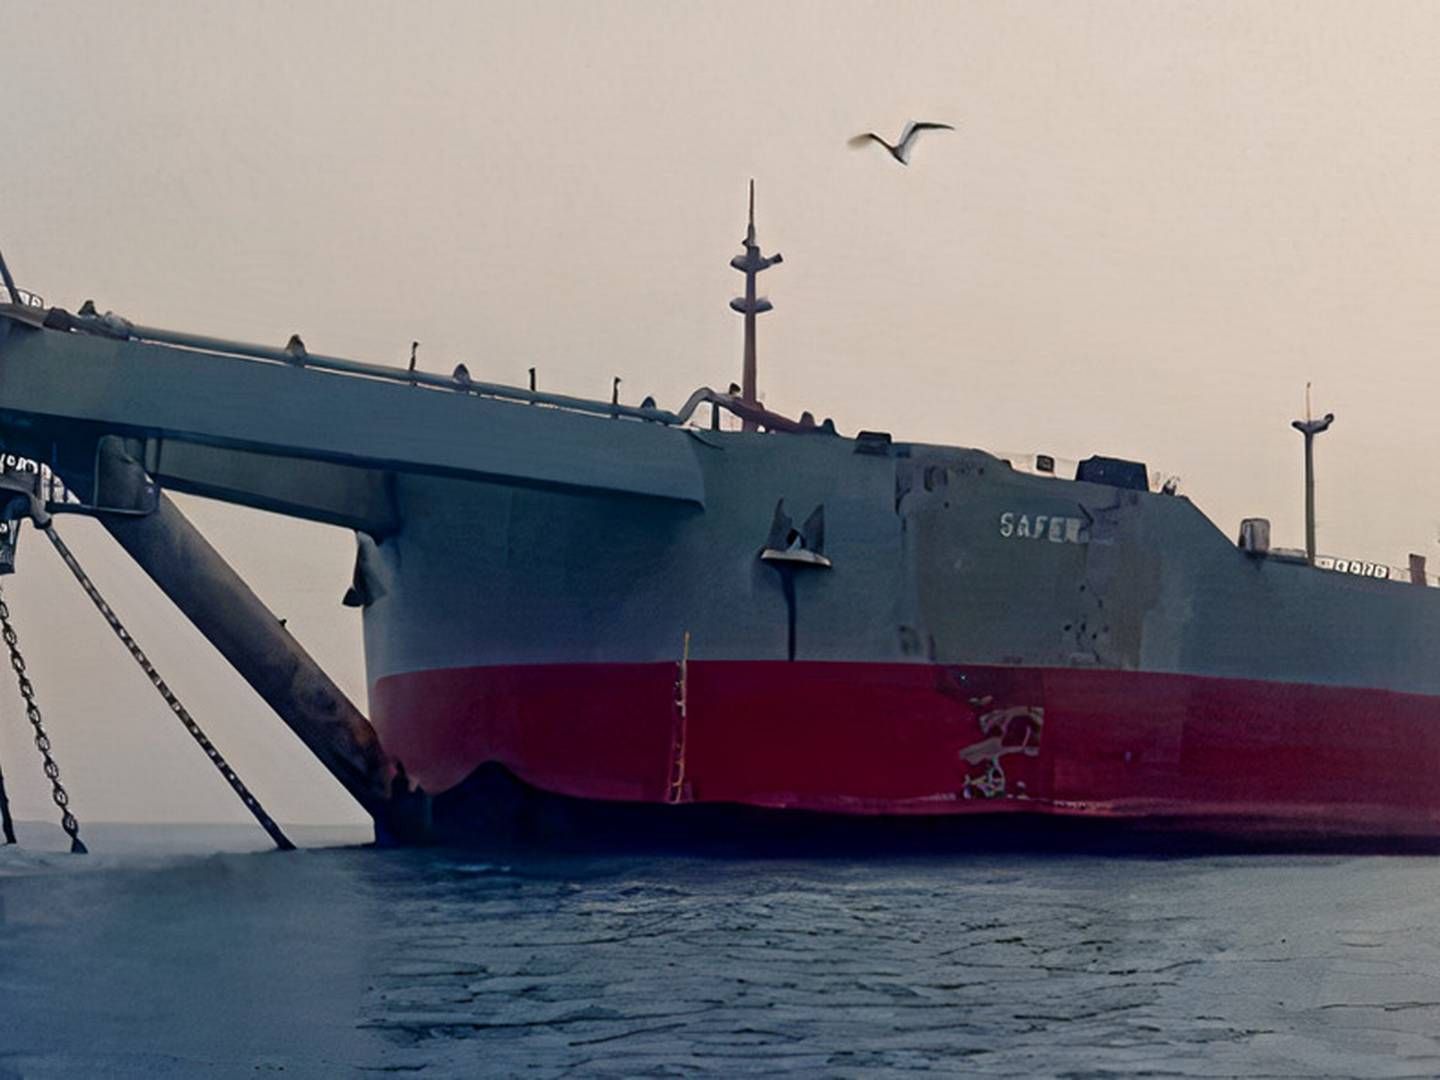 The supertanker FSO Safer has been anchored off the coast of Yemen, filled with oil cargo, for more than 30 years. It was abandoned in 2015. Now, the UN is trying empty and salvage the ship. | Foto: United Nations